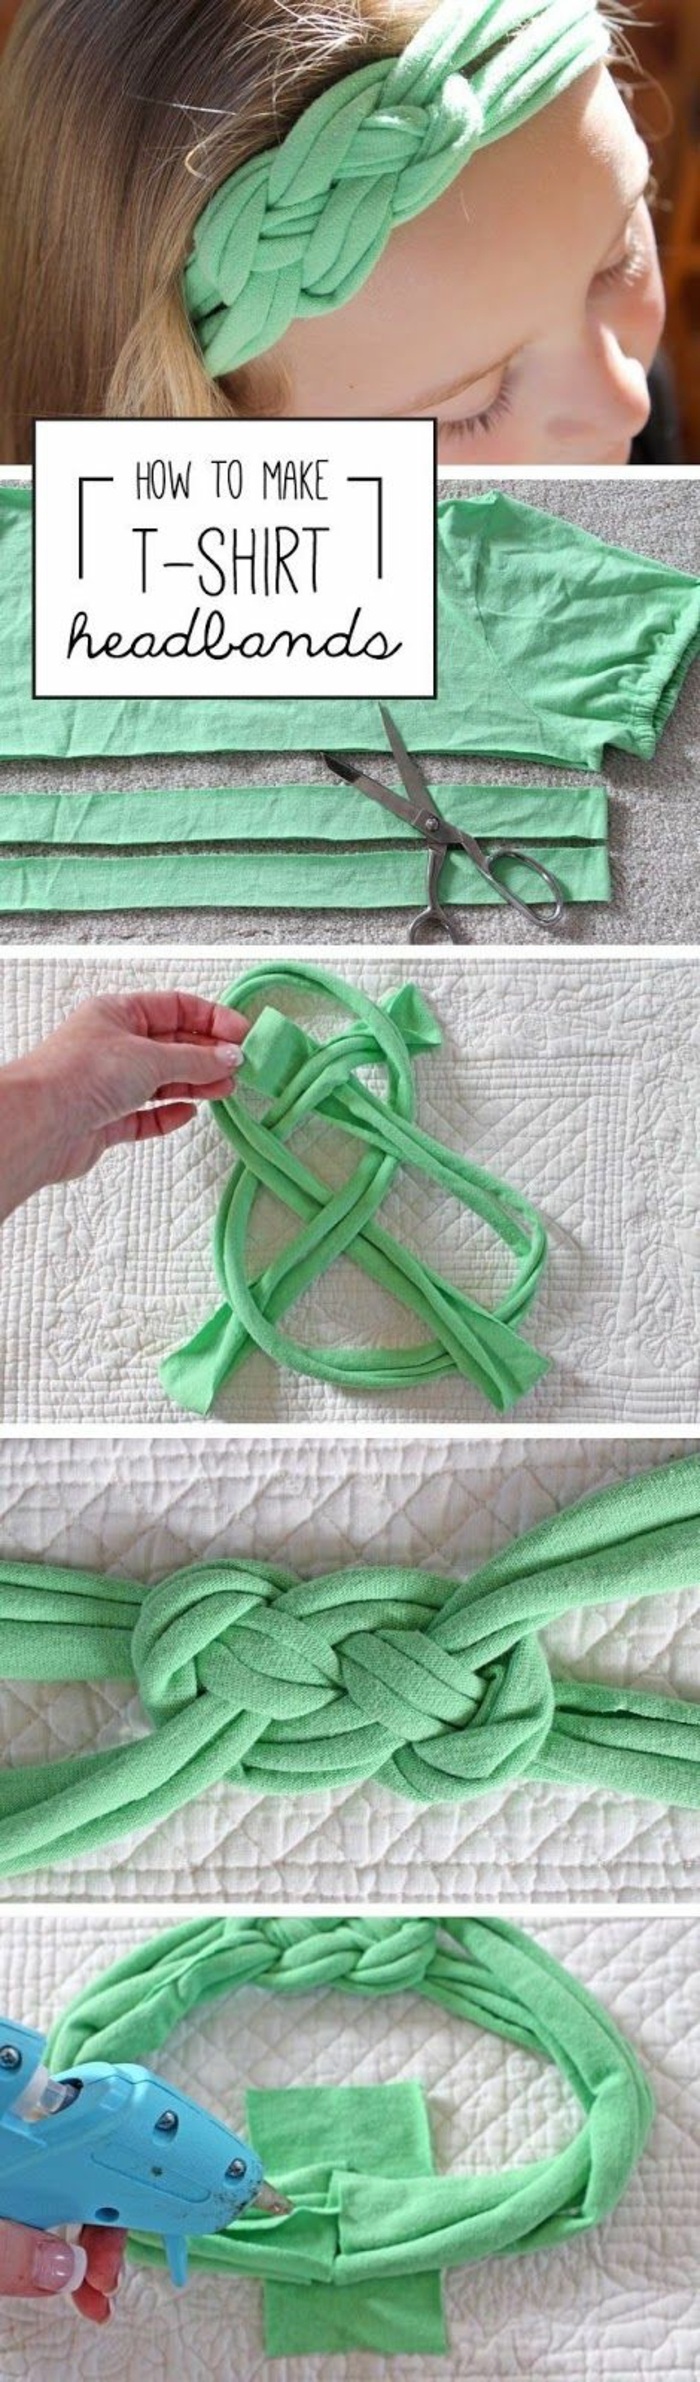 how to make t shirt headbands, creative things to do when bored, green t shirt, diy tutorial, step by step